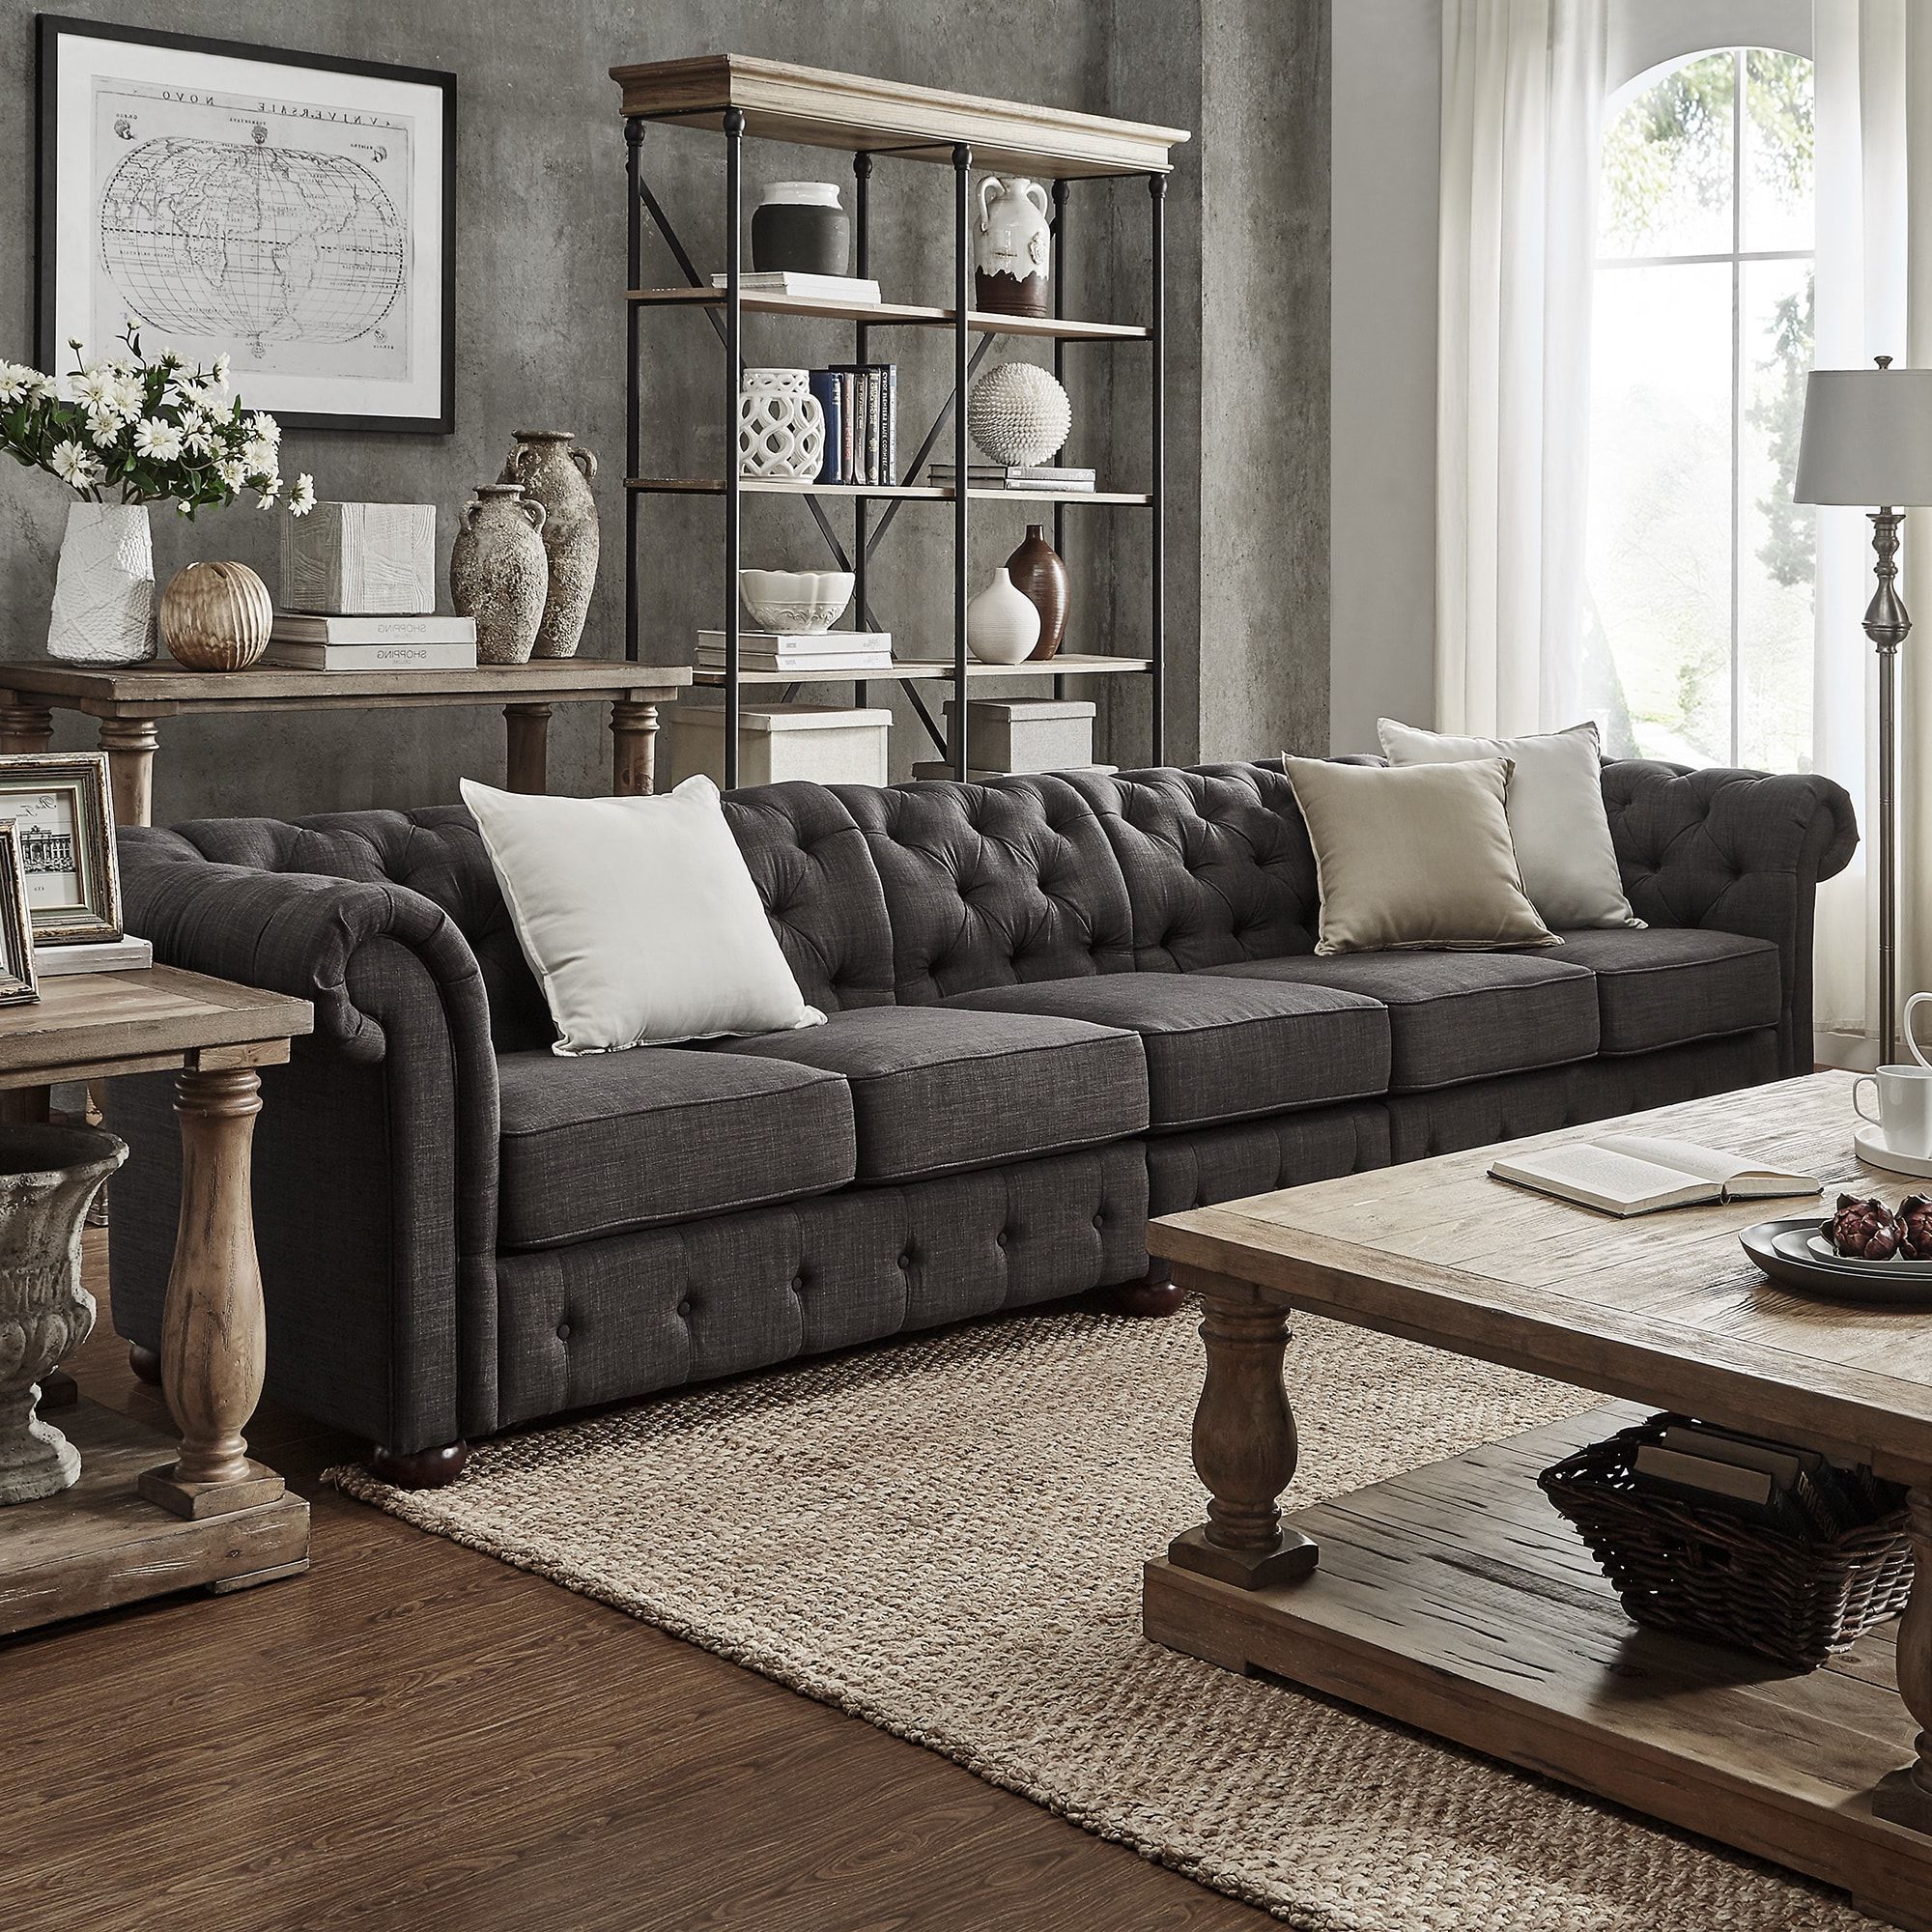 Sofas In Dark Gray For Preferred Knightsbridge Dark Grey Extra Long Tufted Chesterfield Sofainspire (View 6 of 15)